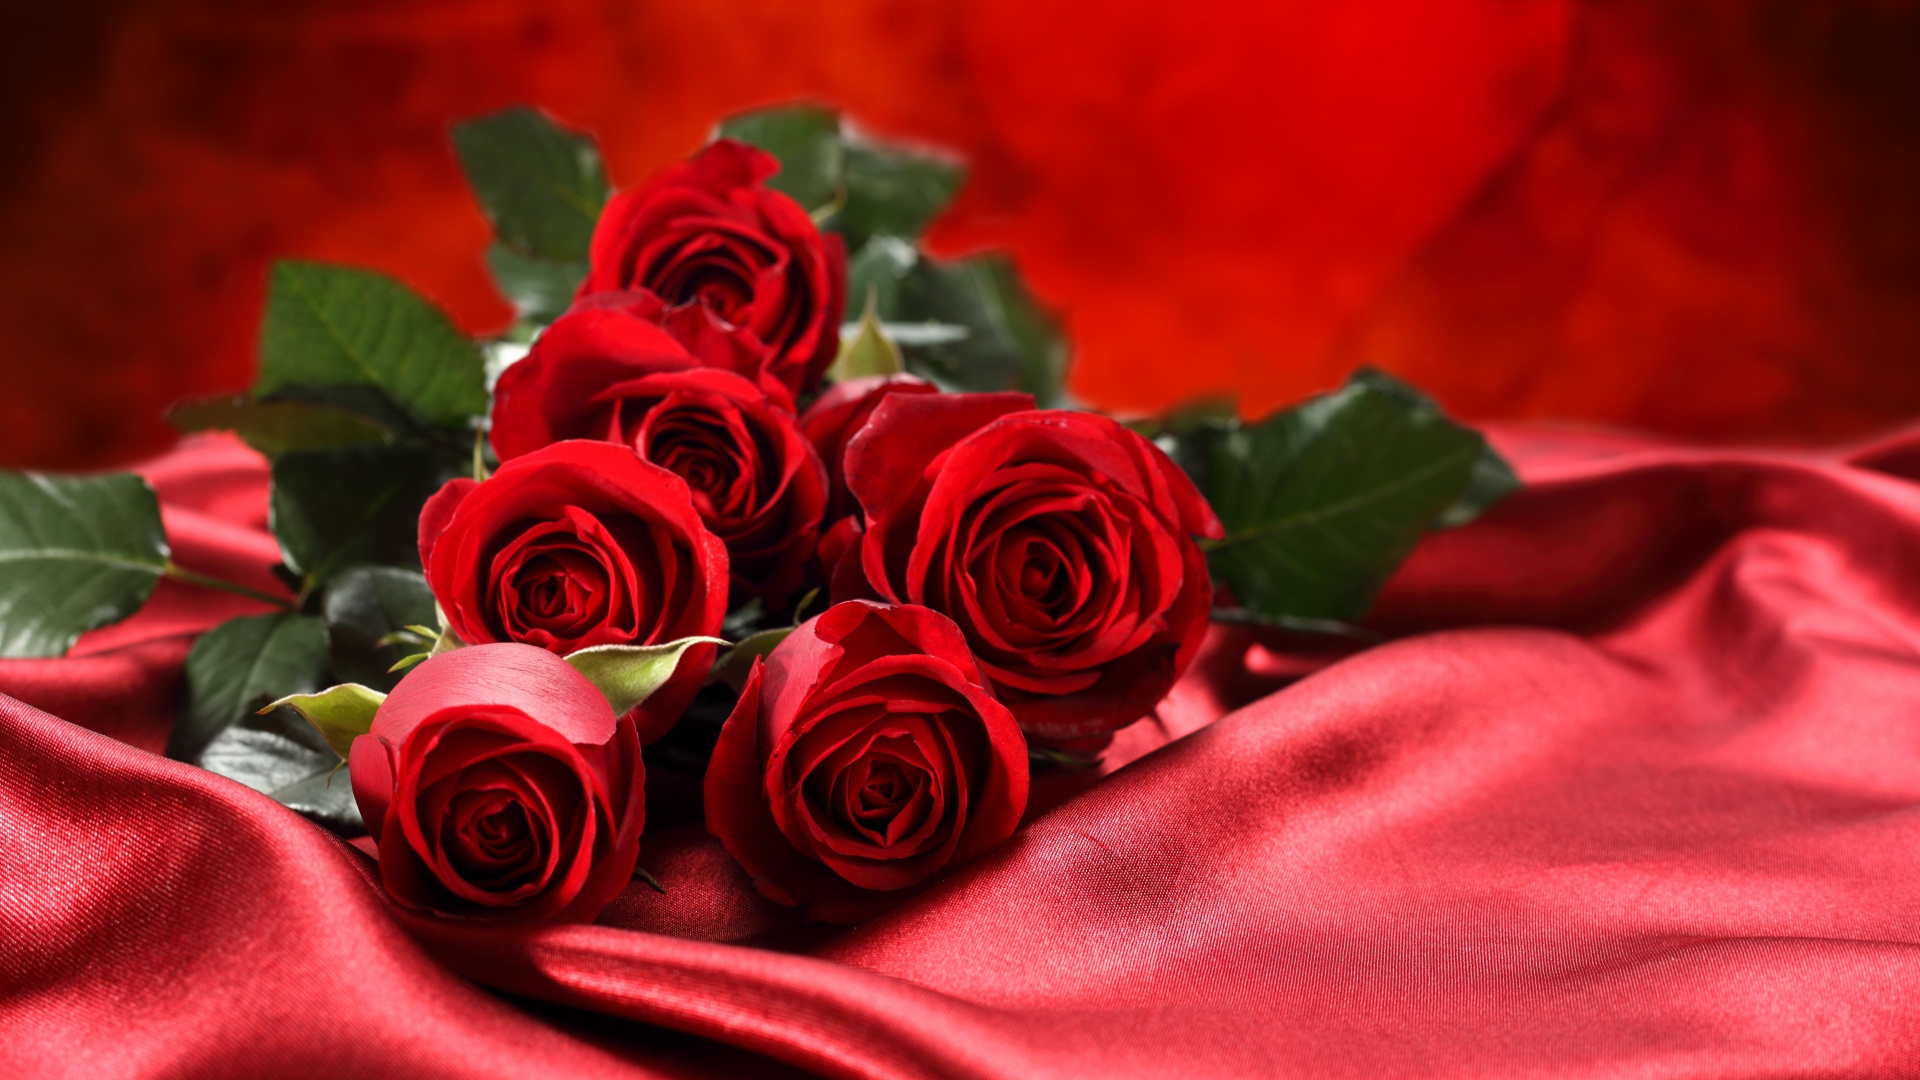 Red Roses on Red Textile. Wallpaper in 1920x1080 Resolution